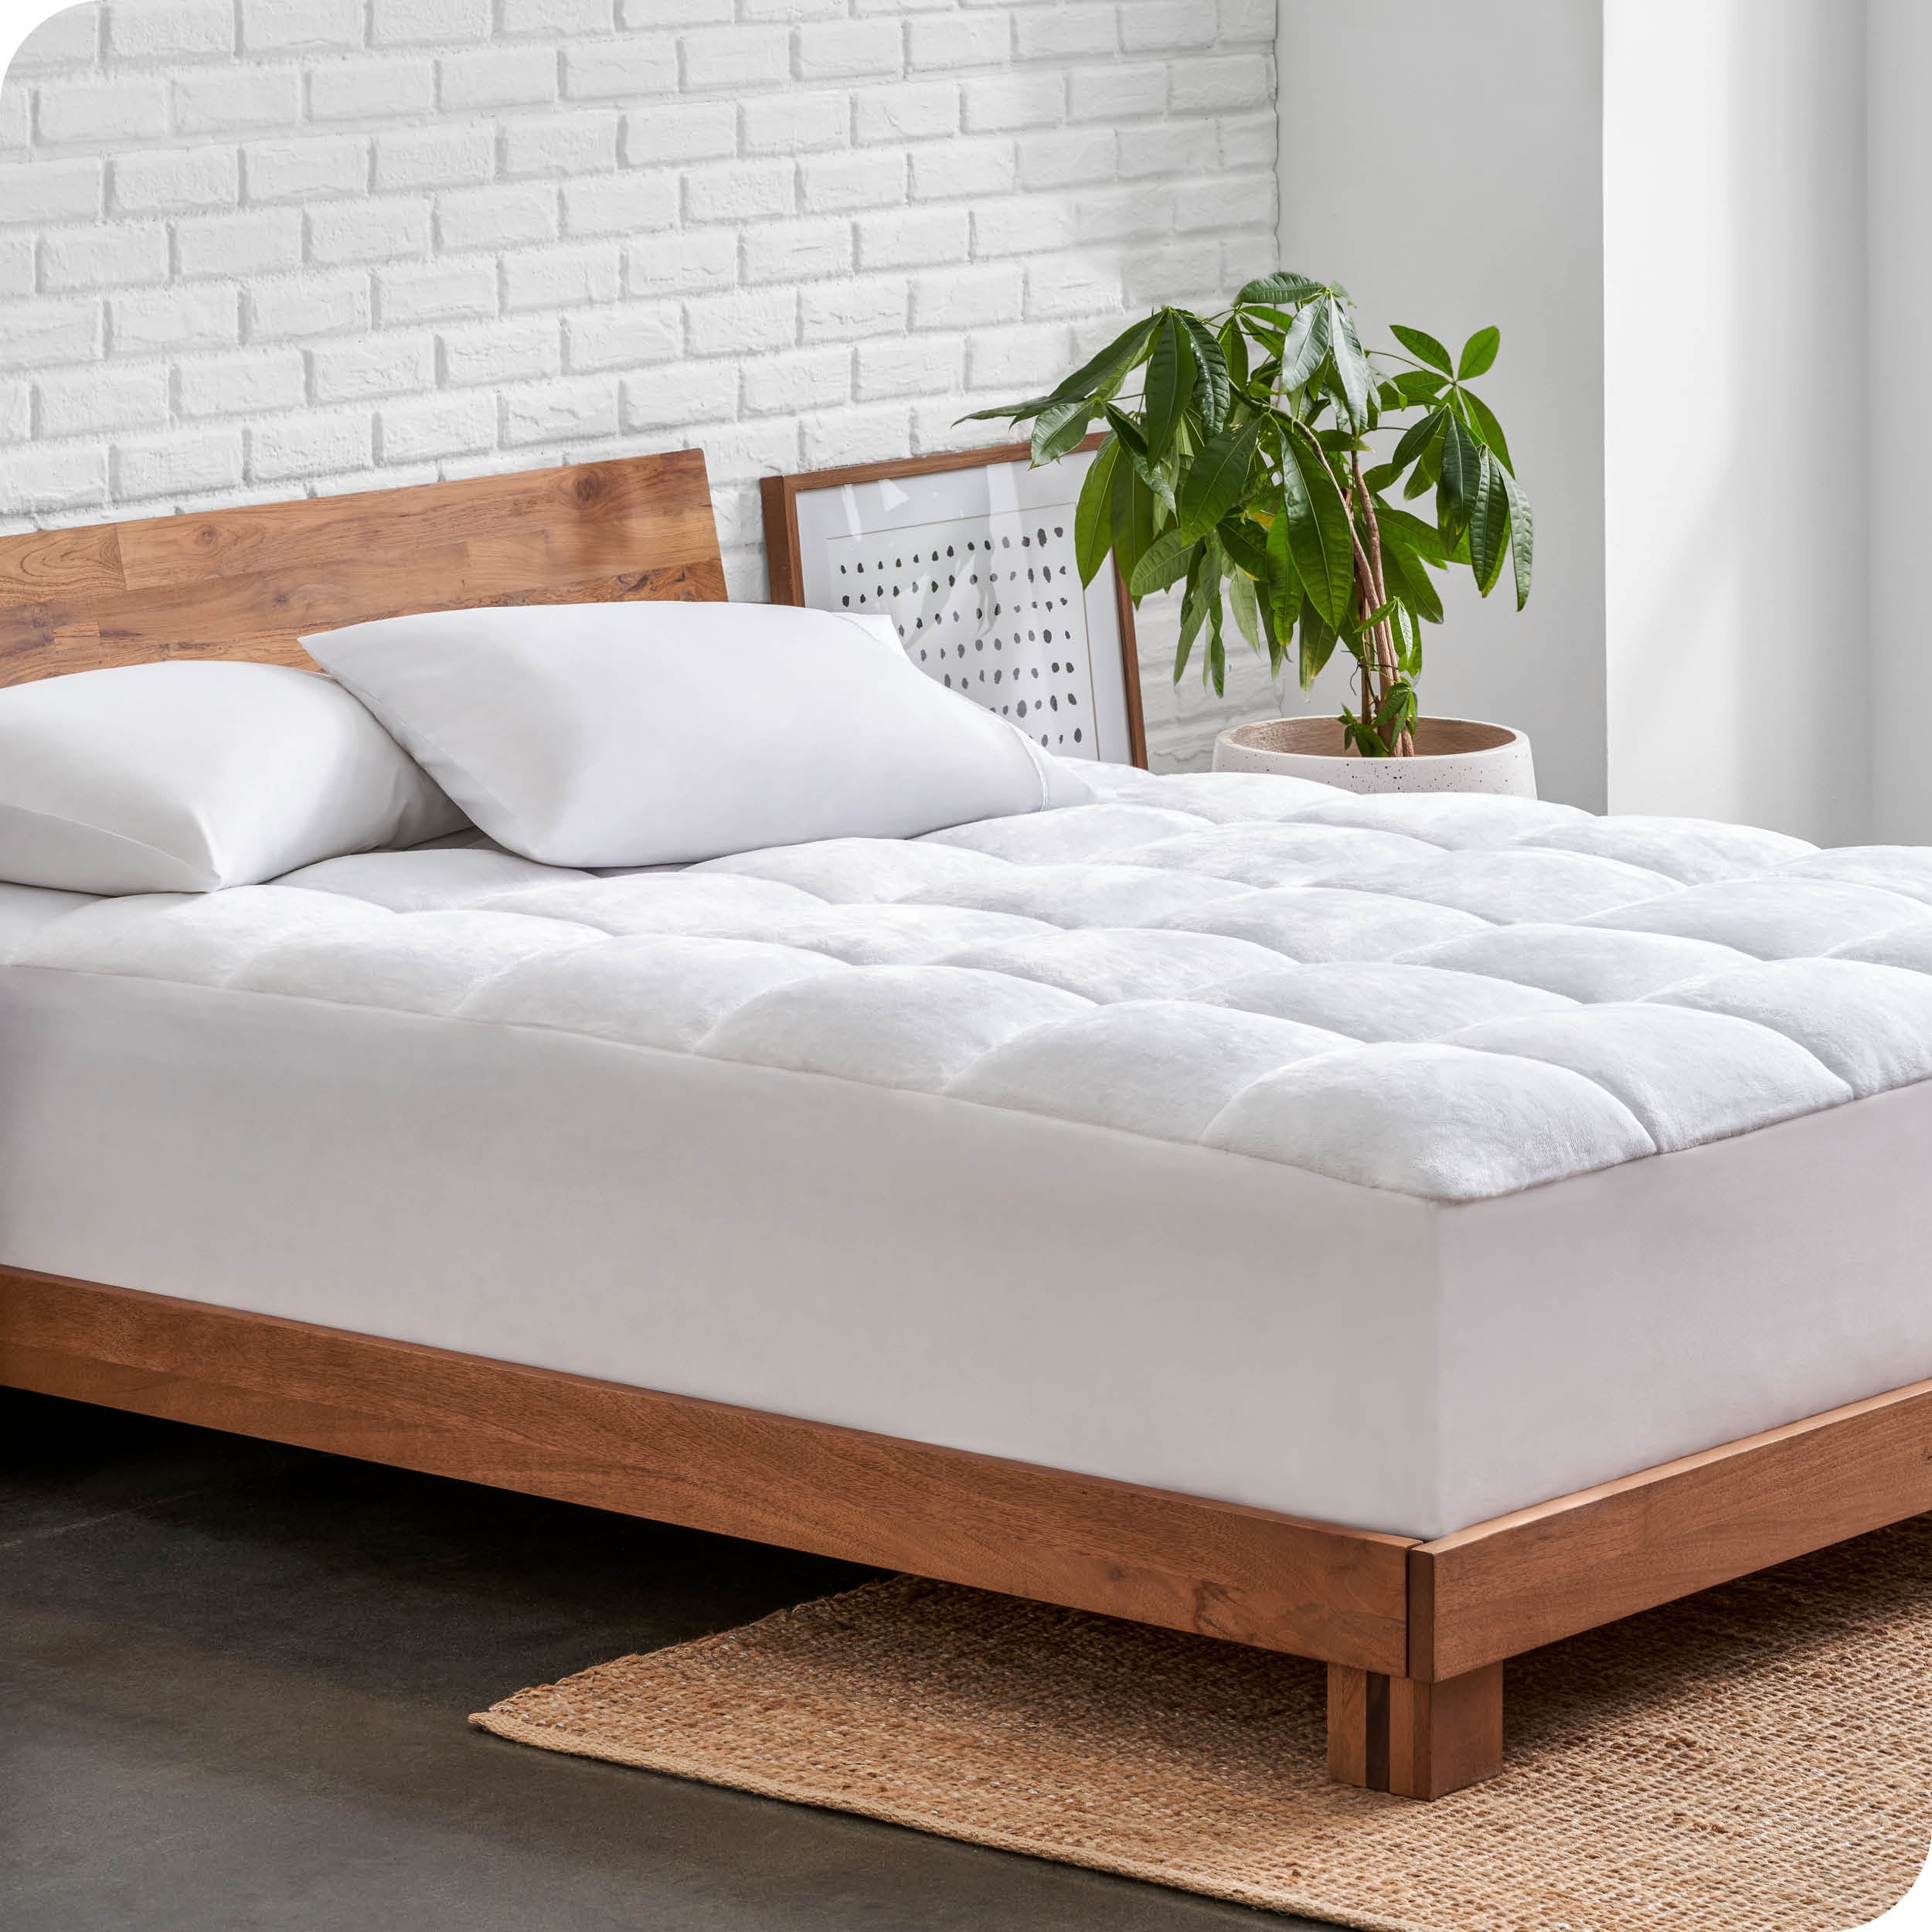 A modern bed with two pillows and a mattress pad all in white. The bed has a wooden bed frame.